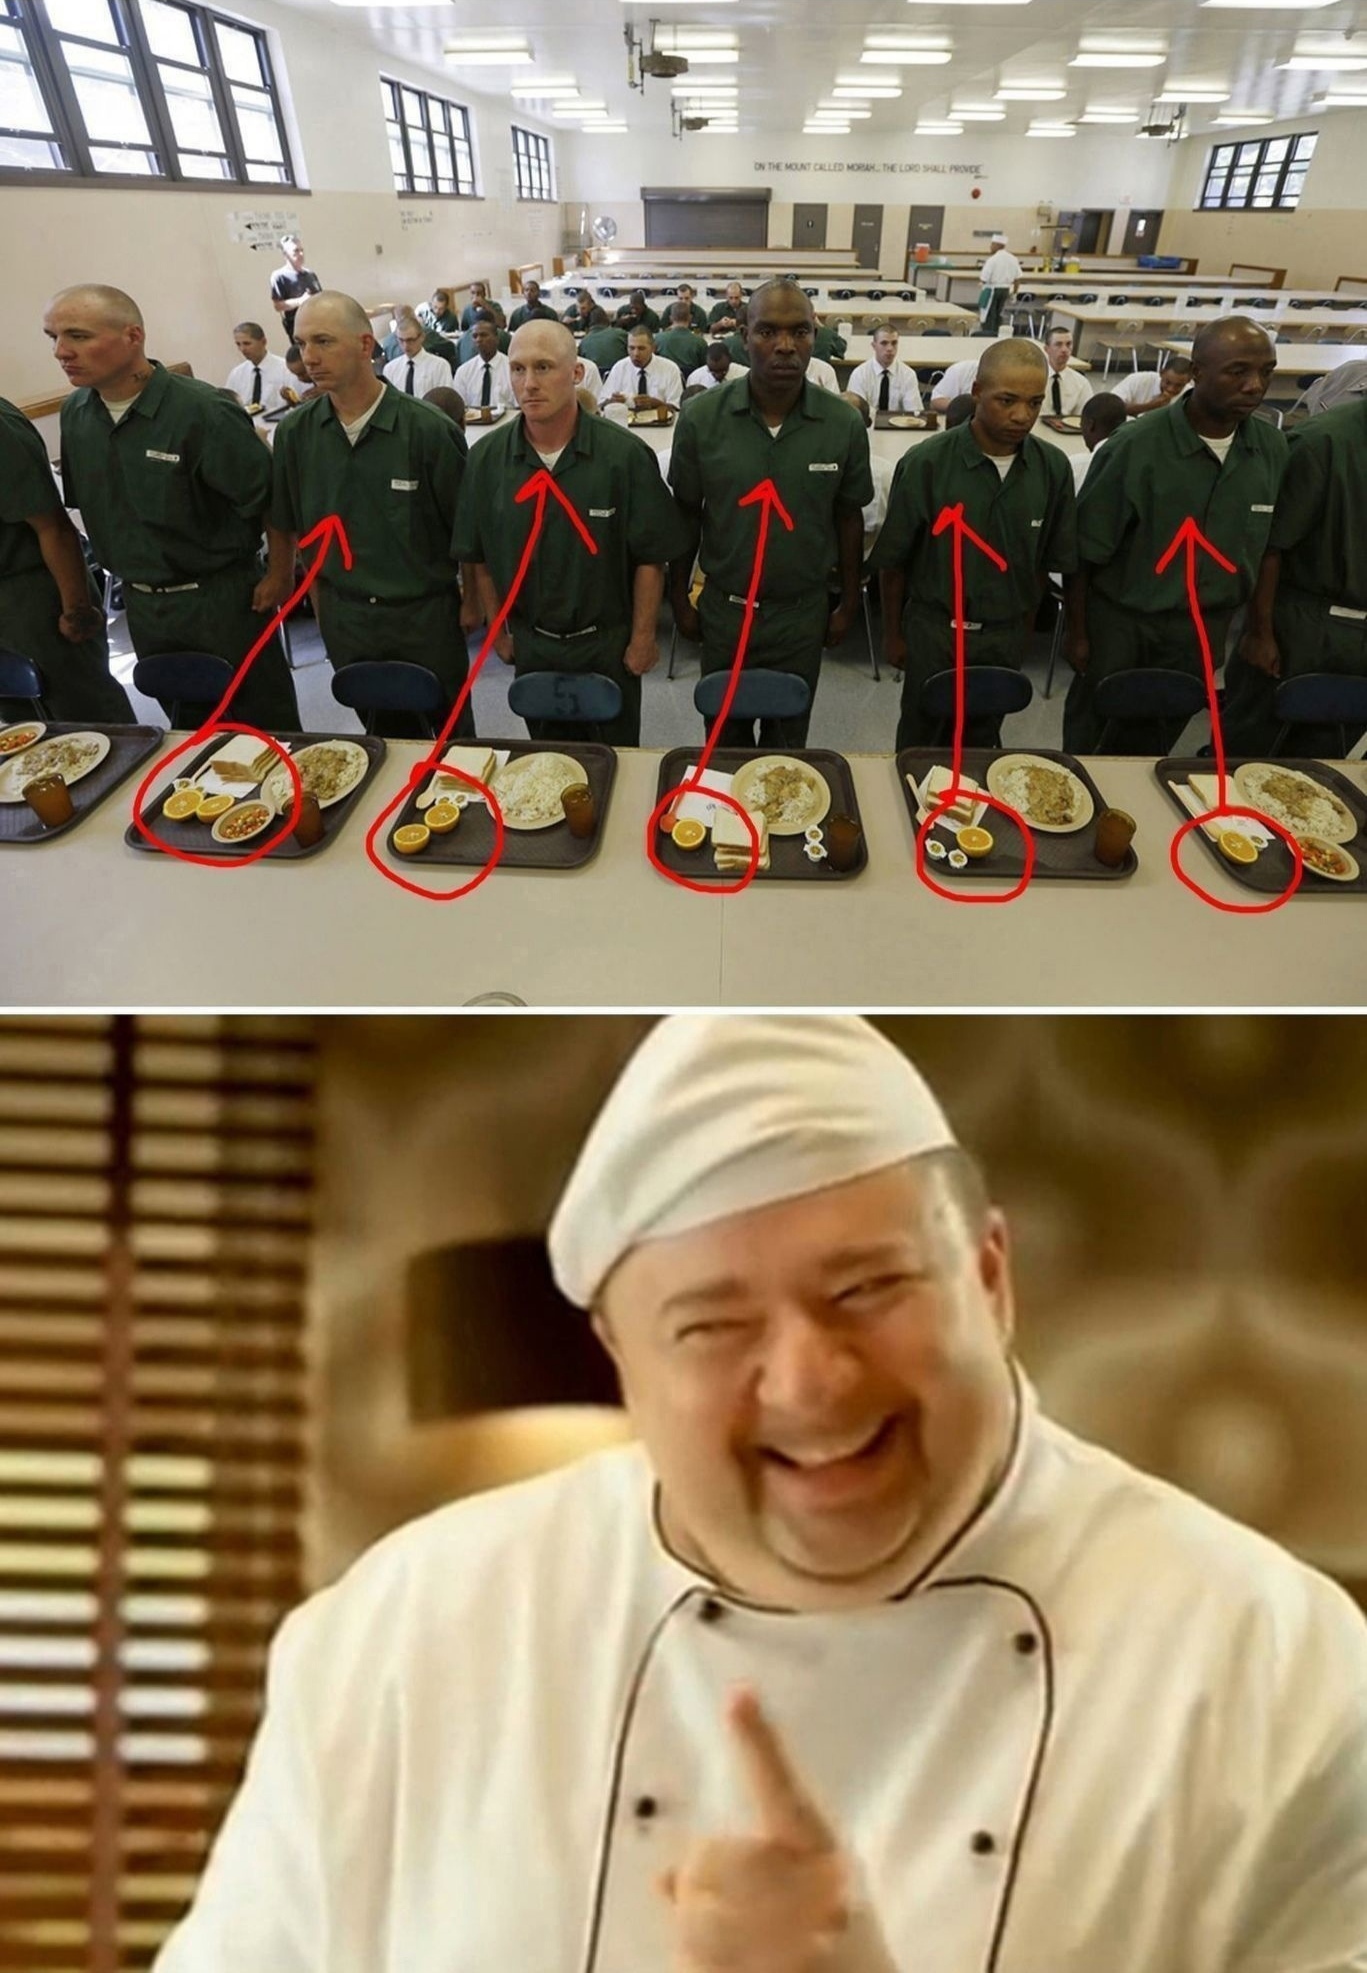 racist cook) - The chef is a racist, Black people, Orange, Canteen